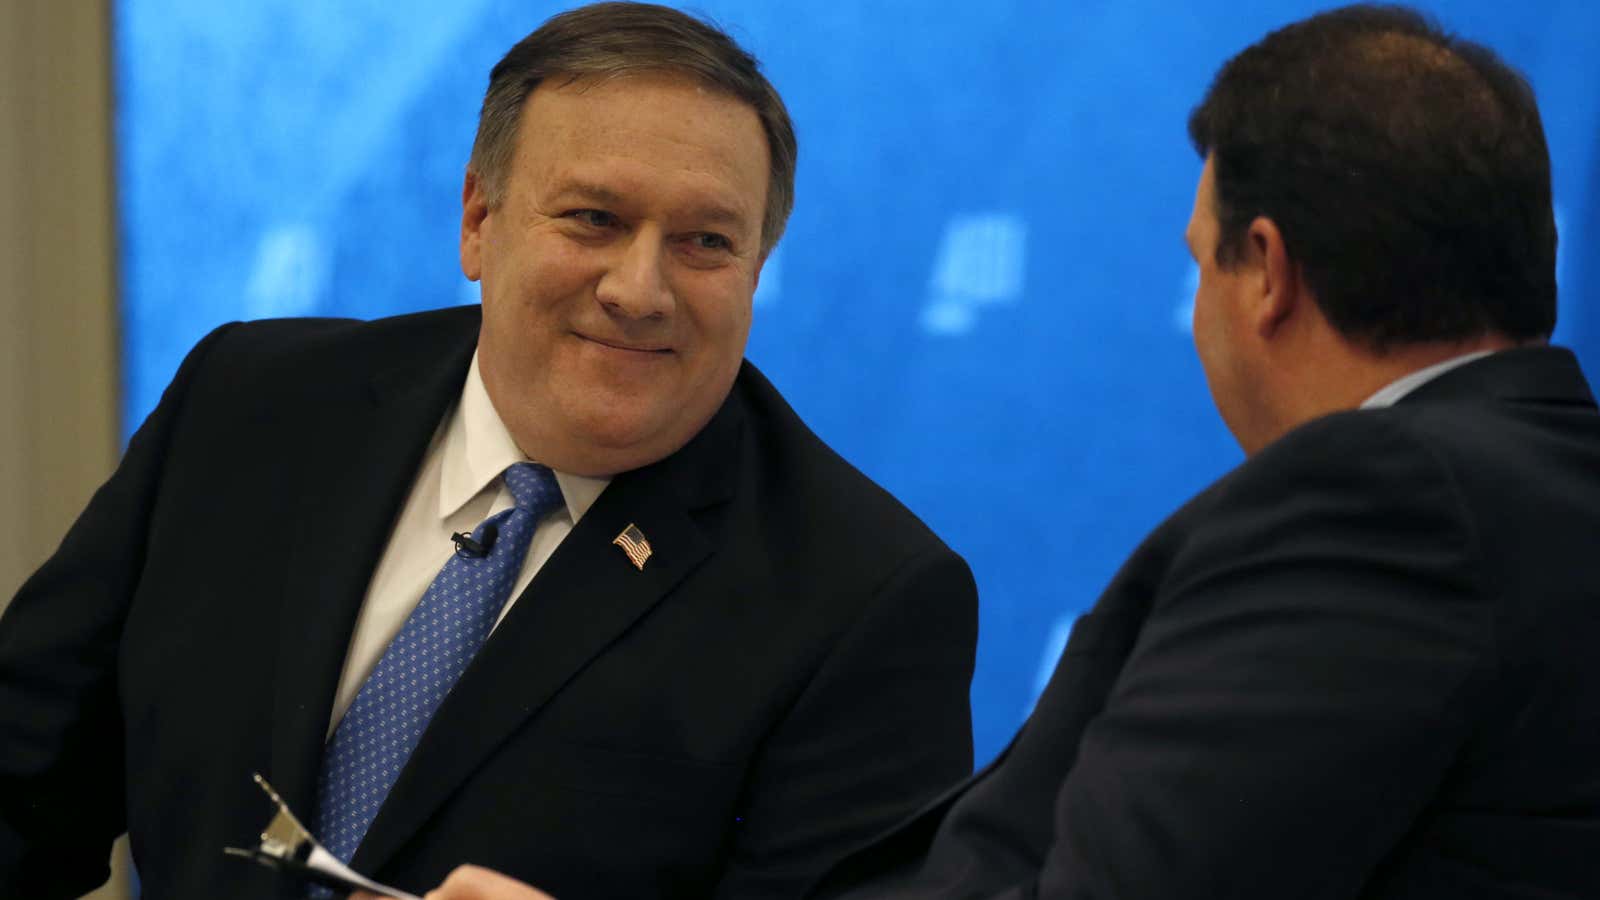 Pompeo was the largest recipient of Koch Industries cash in 2010.